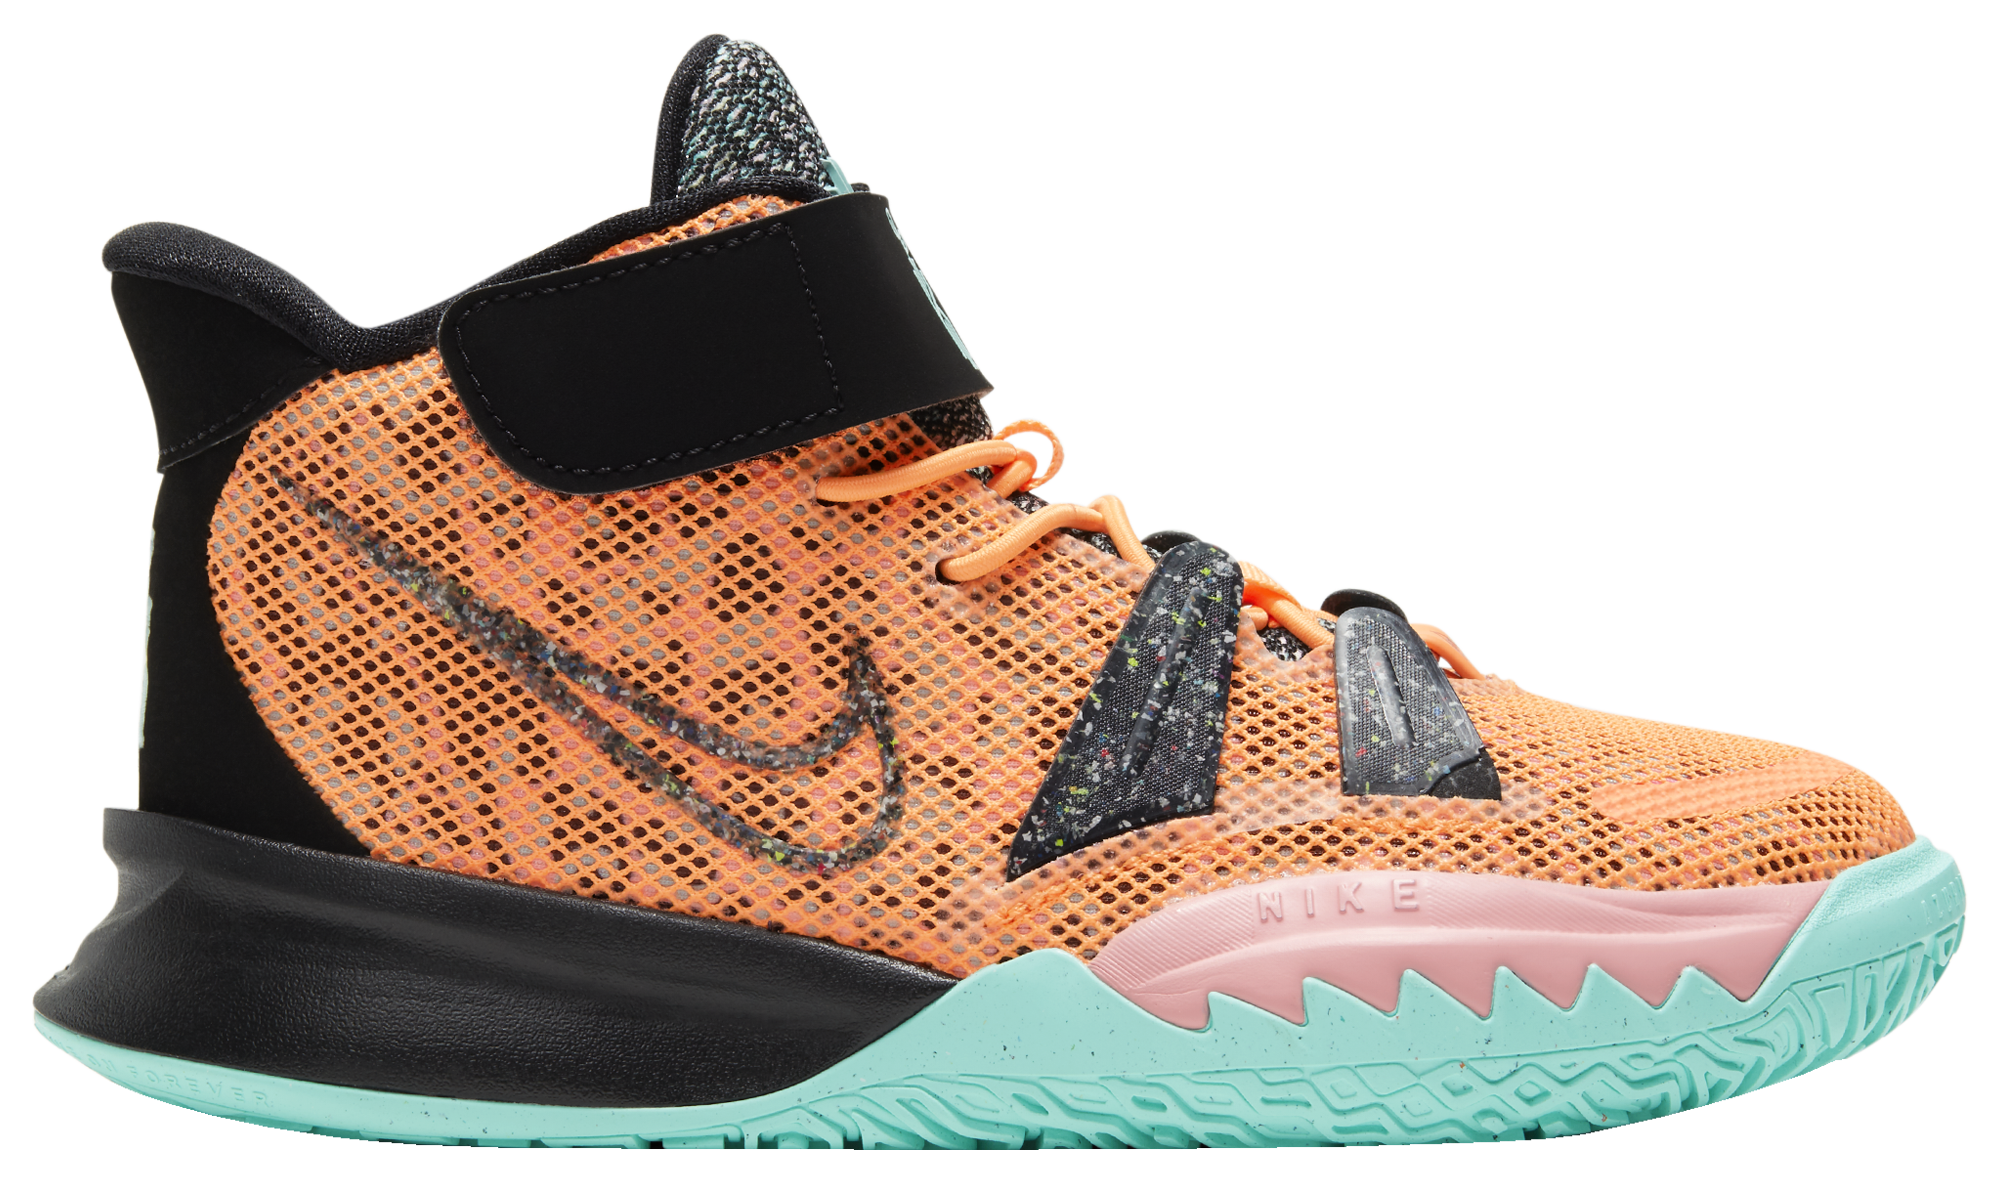 orange kyrie irving shoes